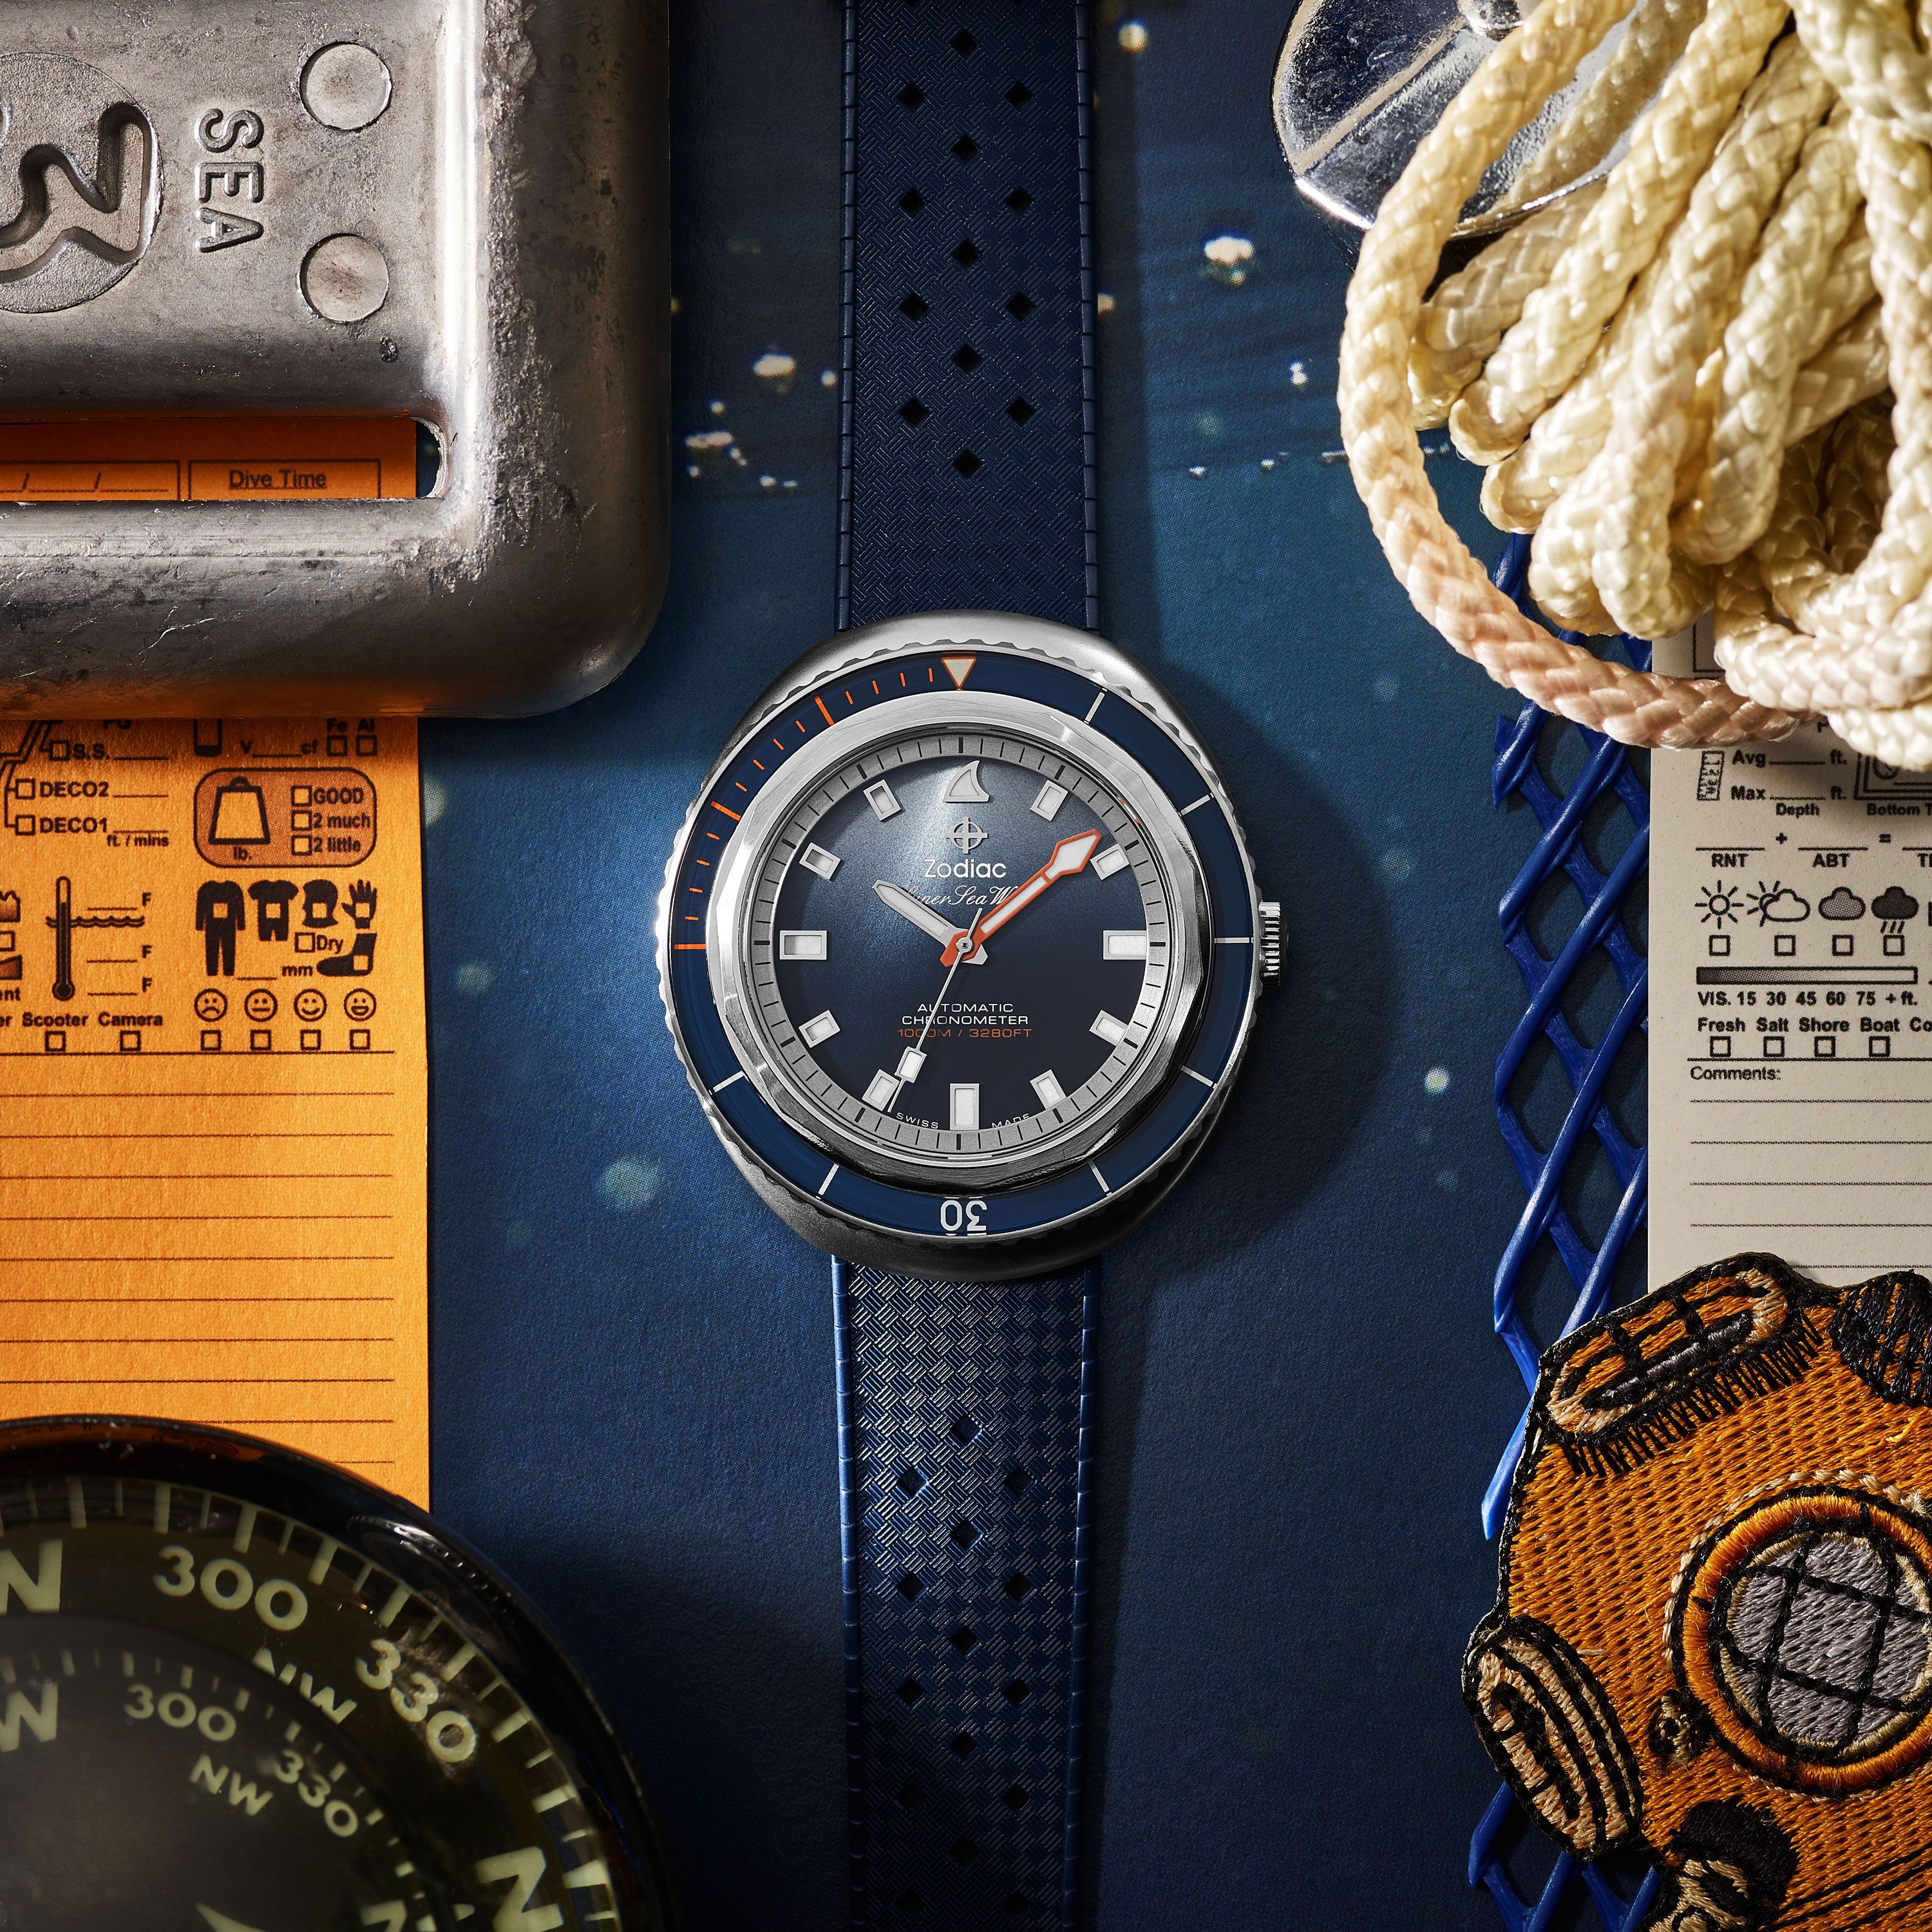 Zodiac x Andy Mann Super Sea Wolf 68 Saturation Watch Review